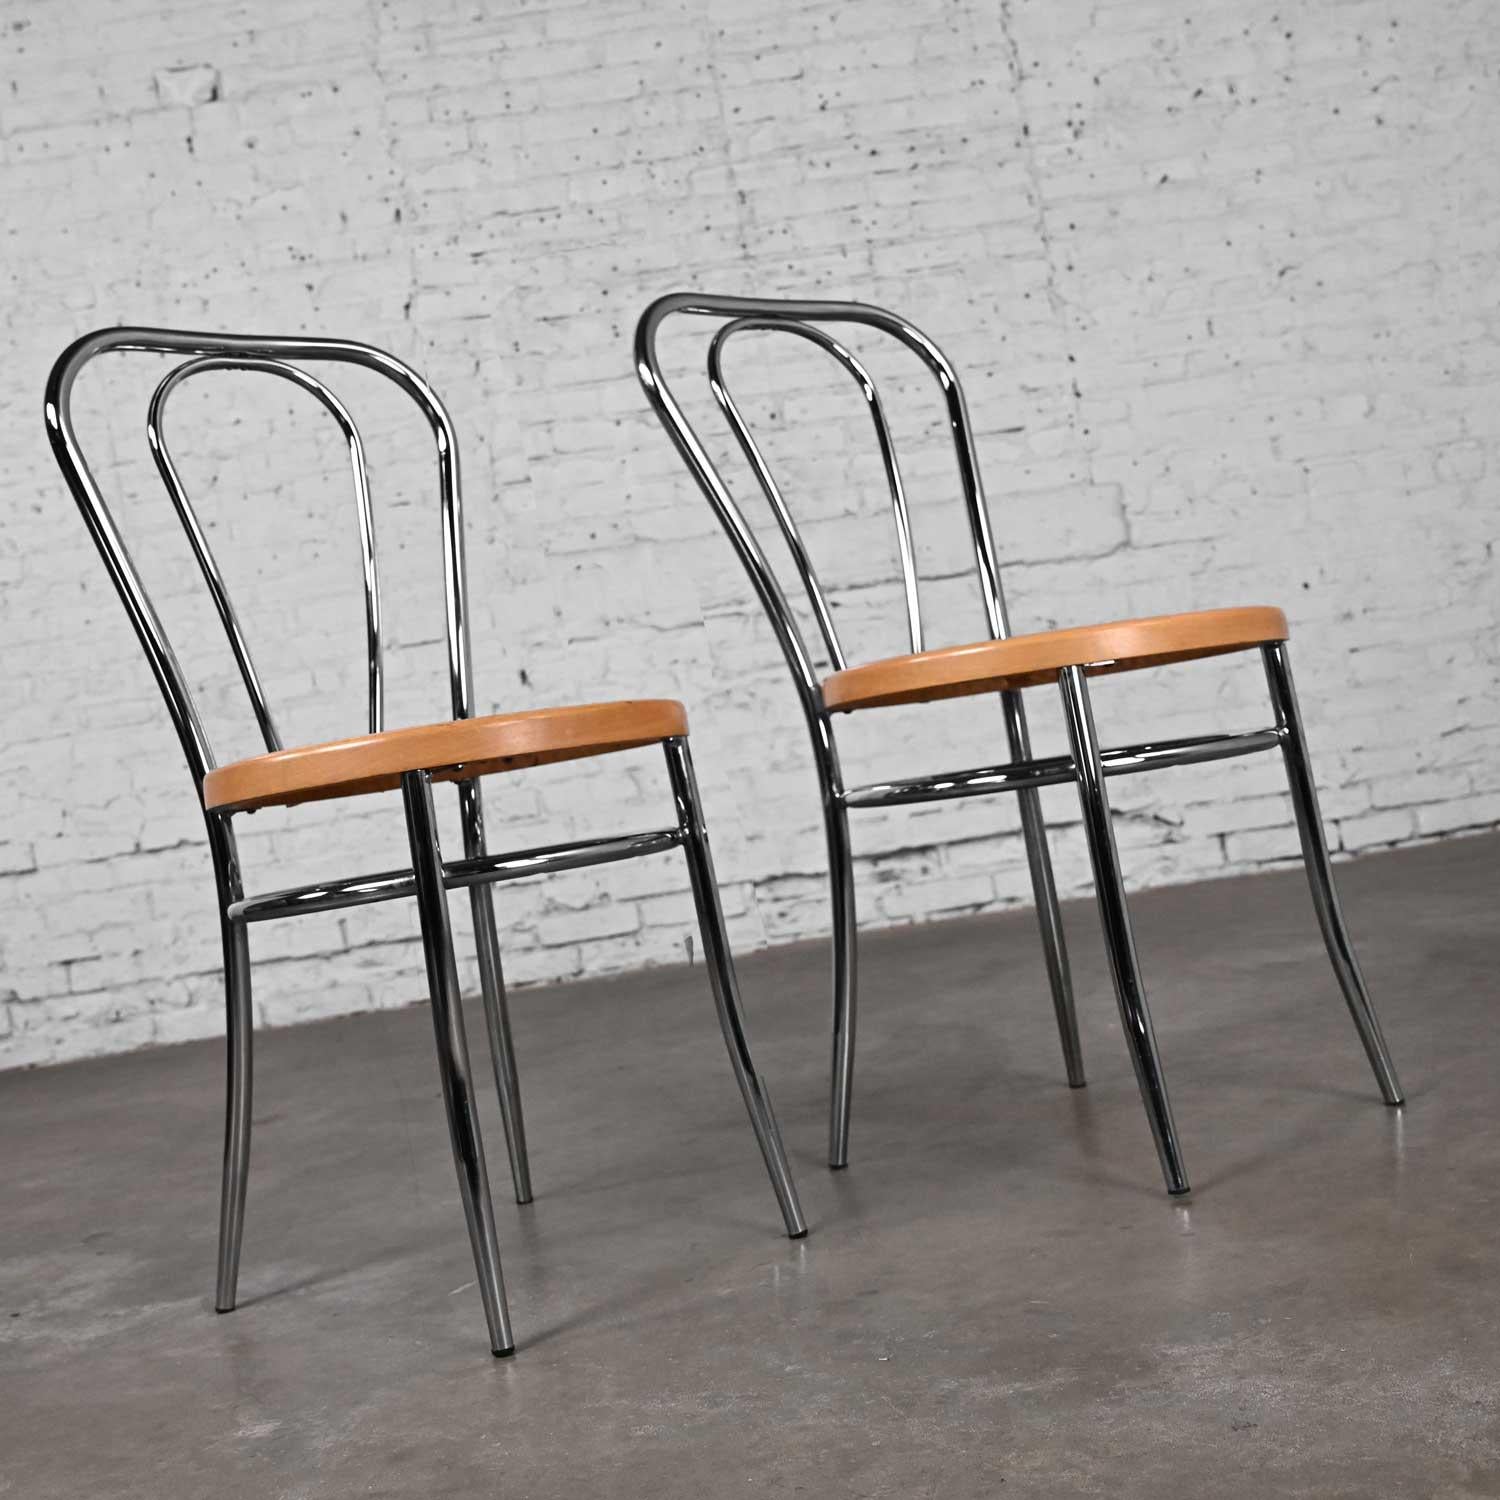 Pair Made Italy Bauhaus Style Bistro Café Chairs Chrome Cane Seat After Thonet In Good Condition For Sale In Topeka, KS